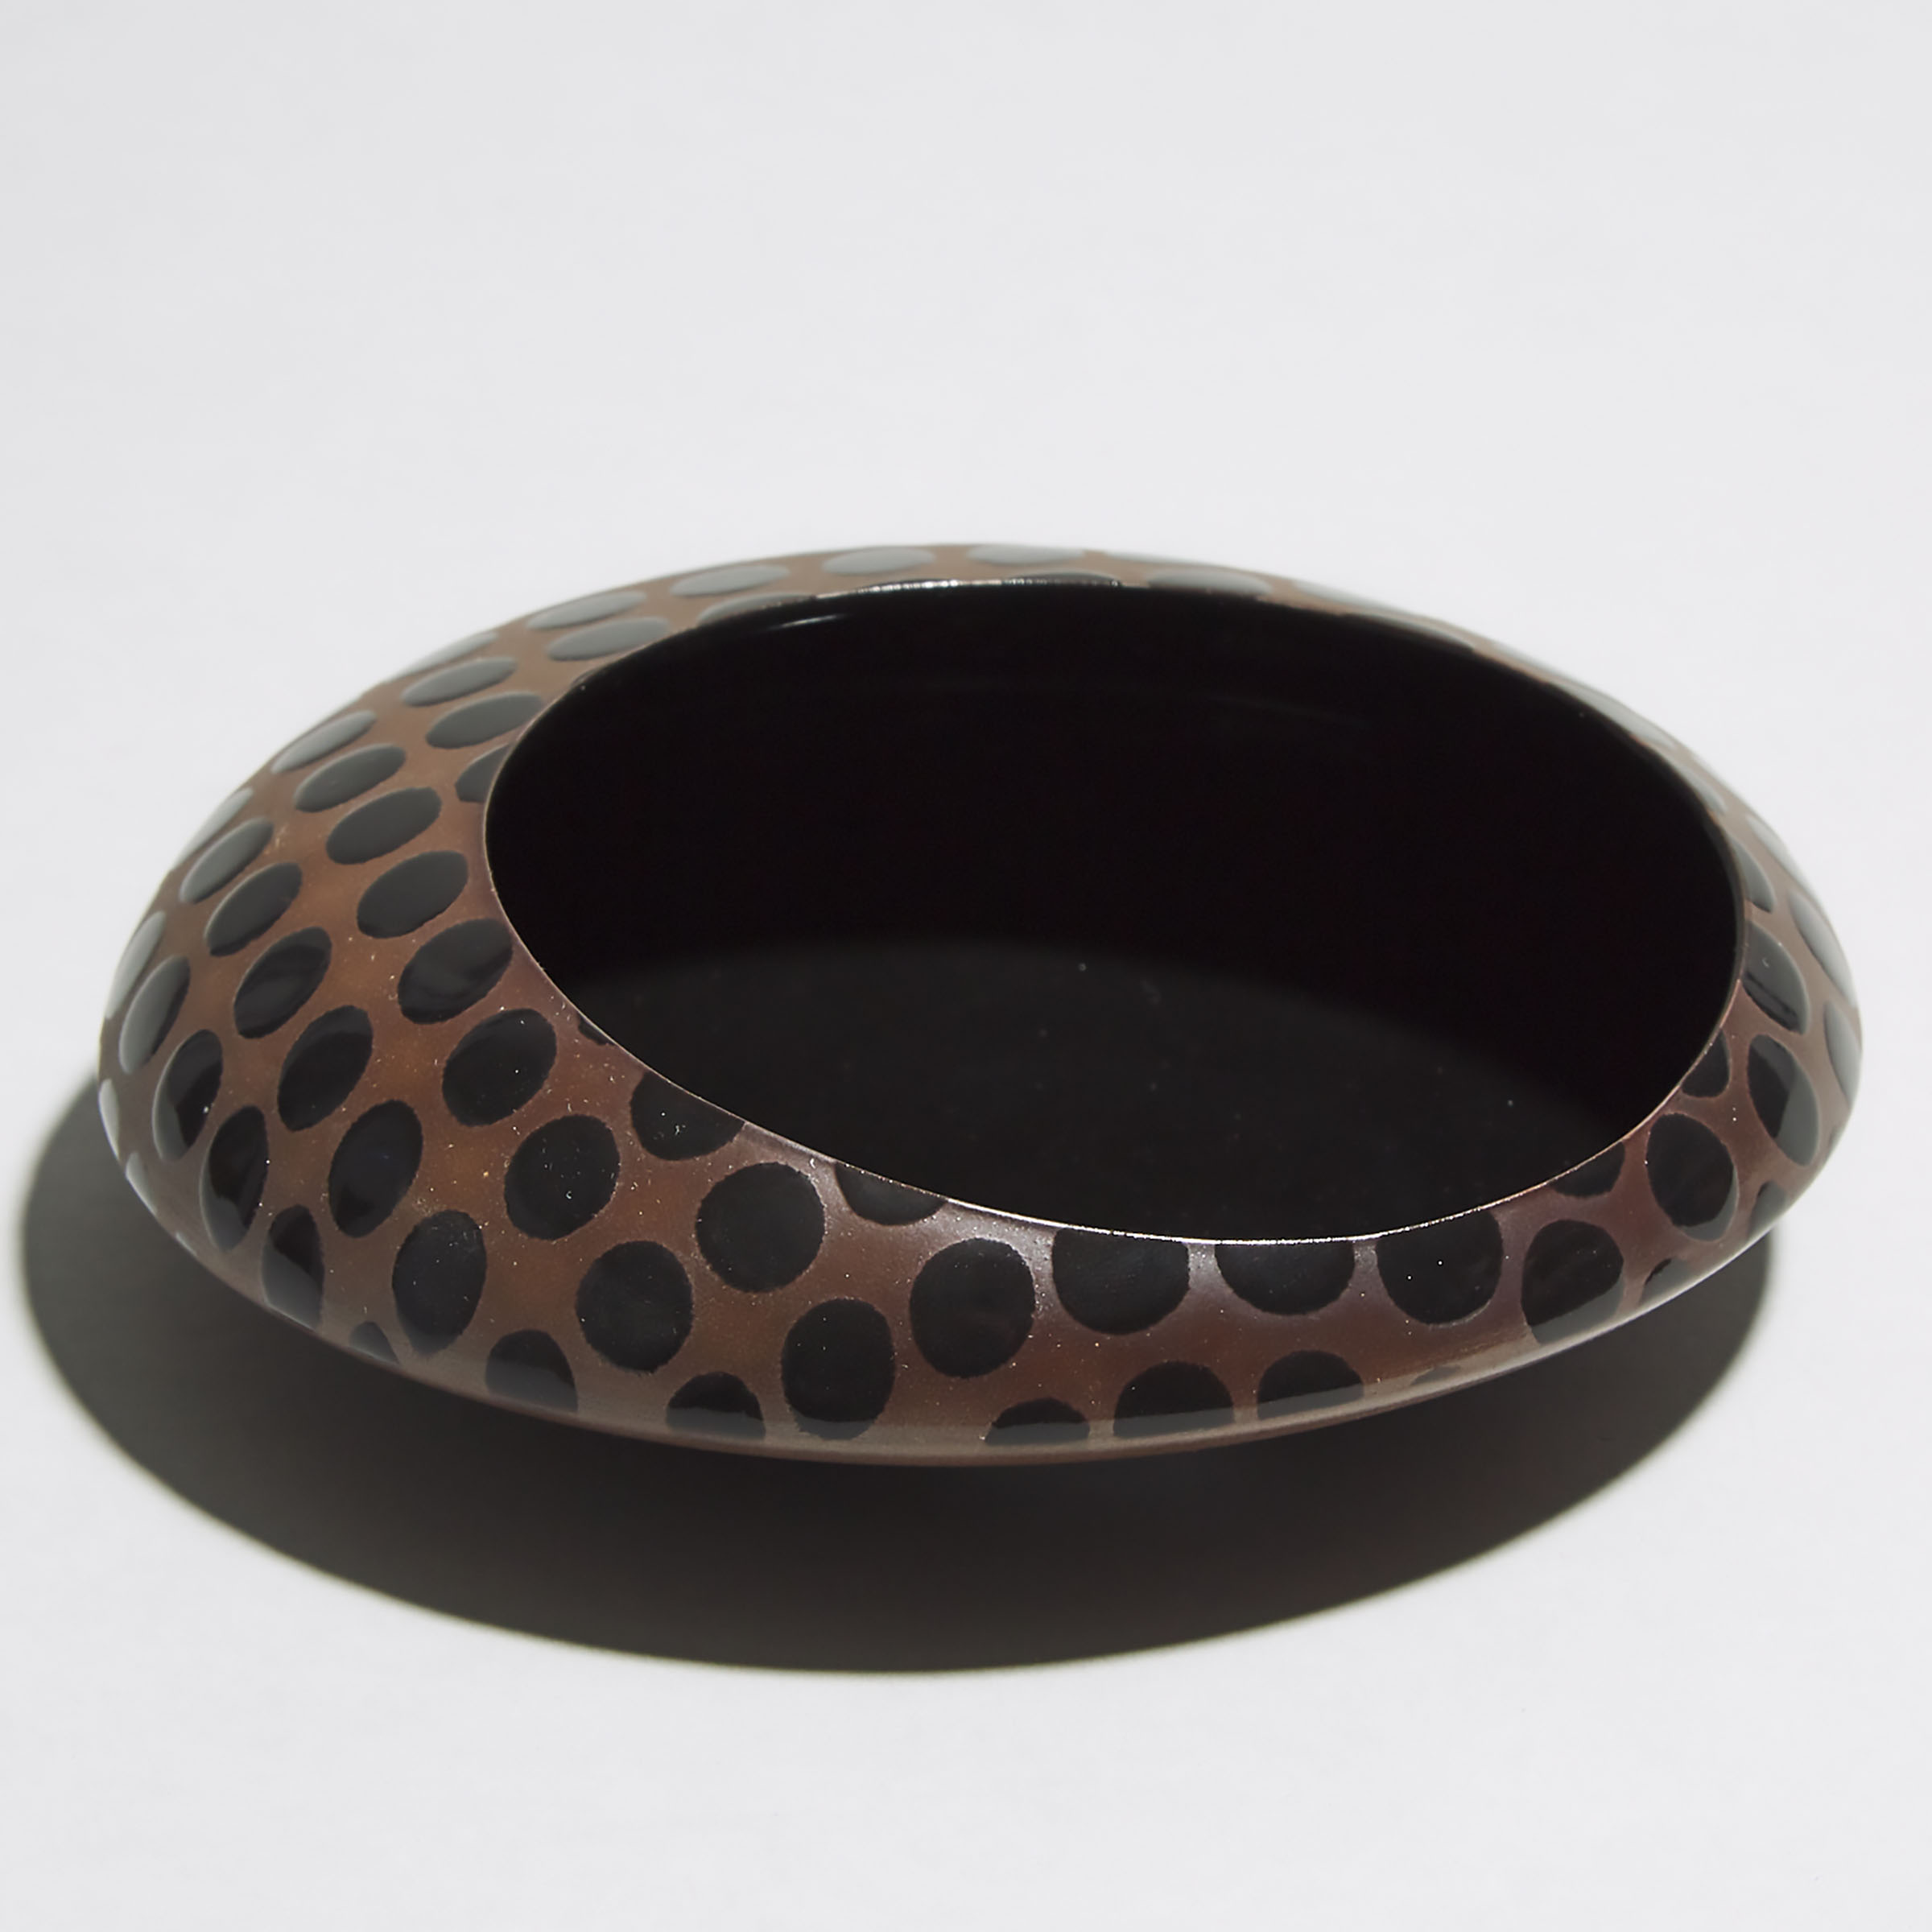 Denise Goyer and Alain Bonneau (Canadian, b.1947 and 1946), Spotted Dish, 1984